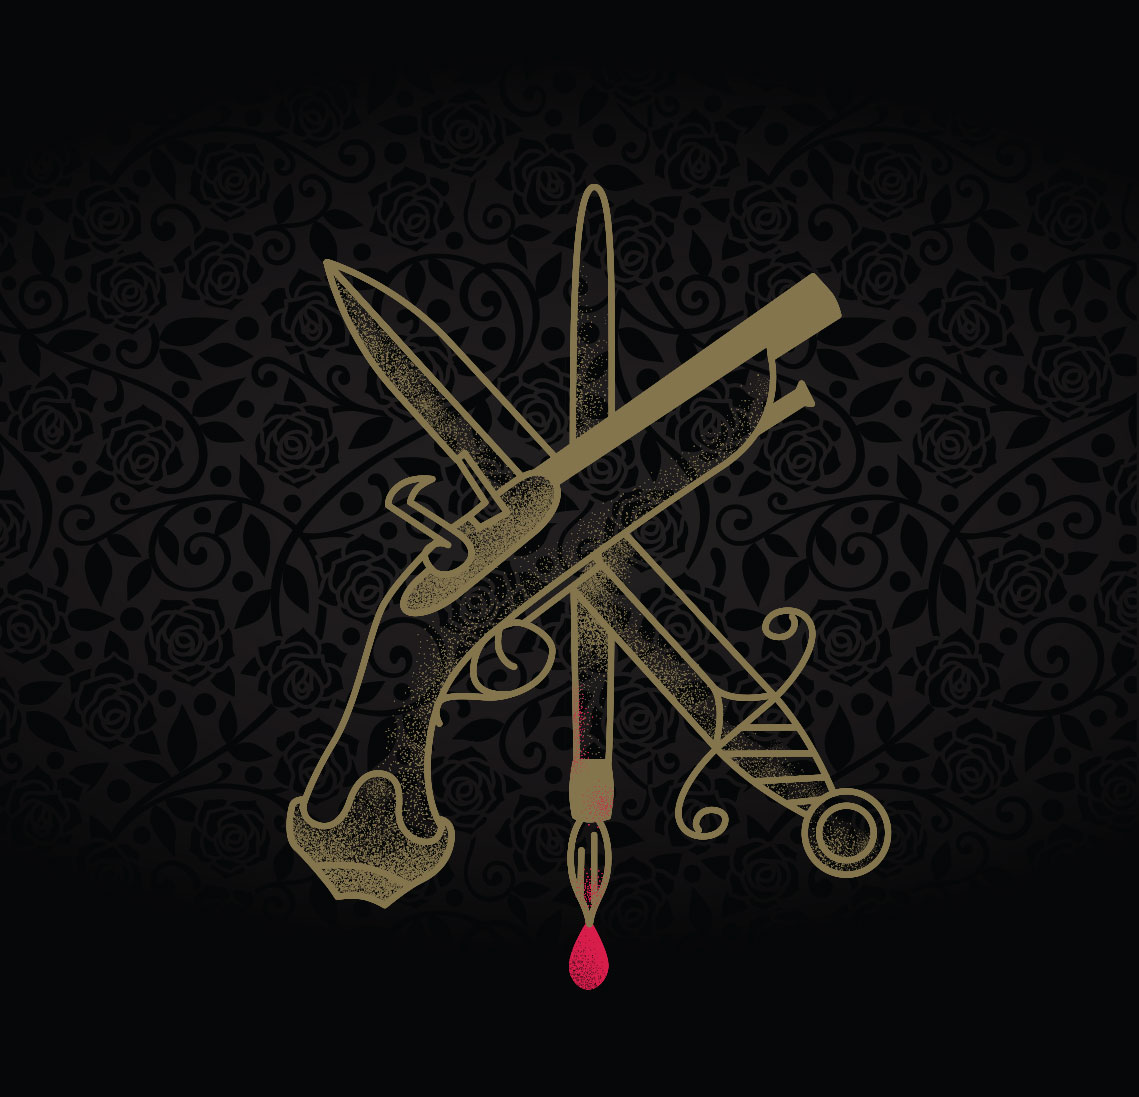 Paint brush dripping red paint with a criss-crossed dagger and pistol on a black rose textured background